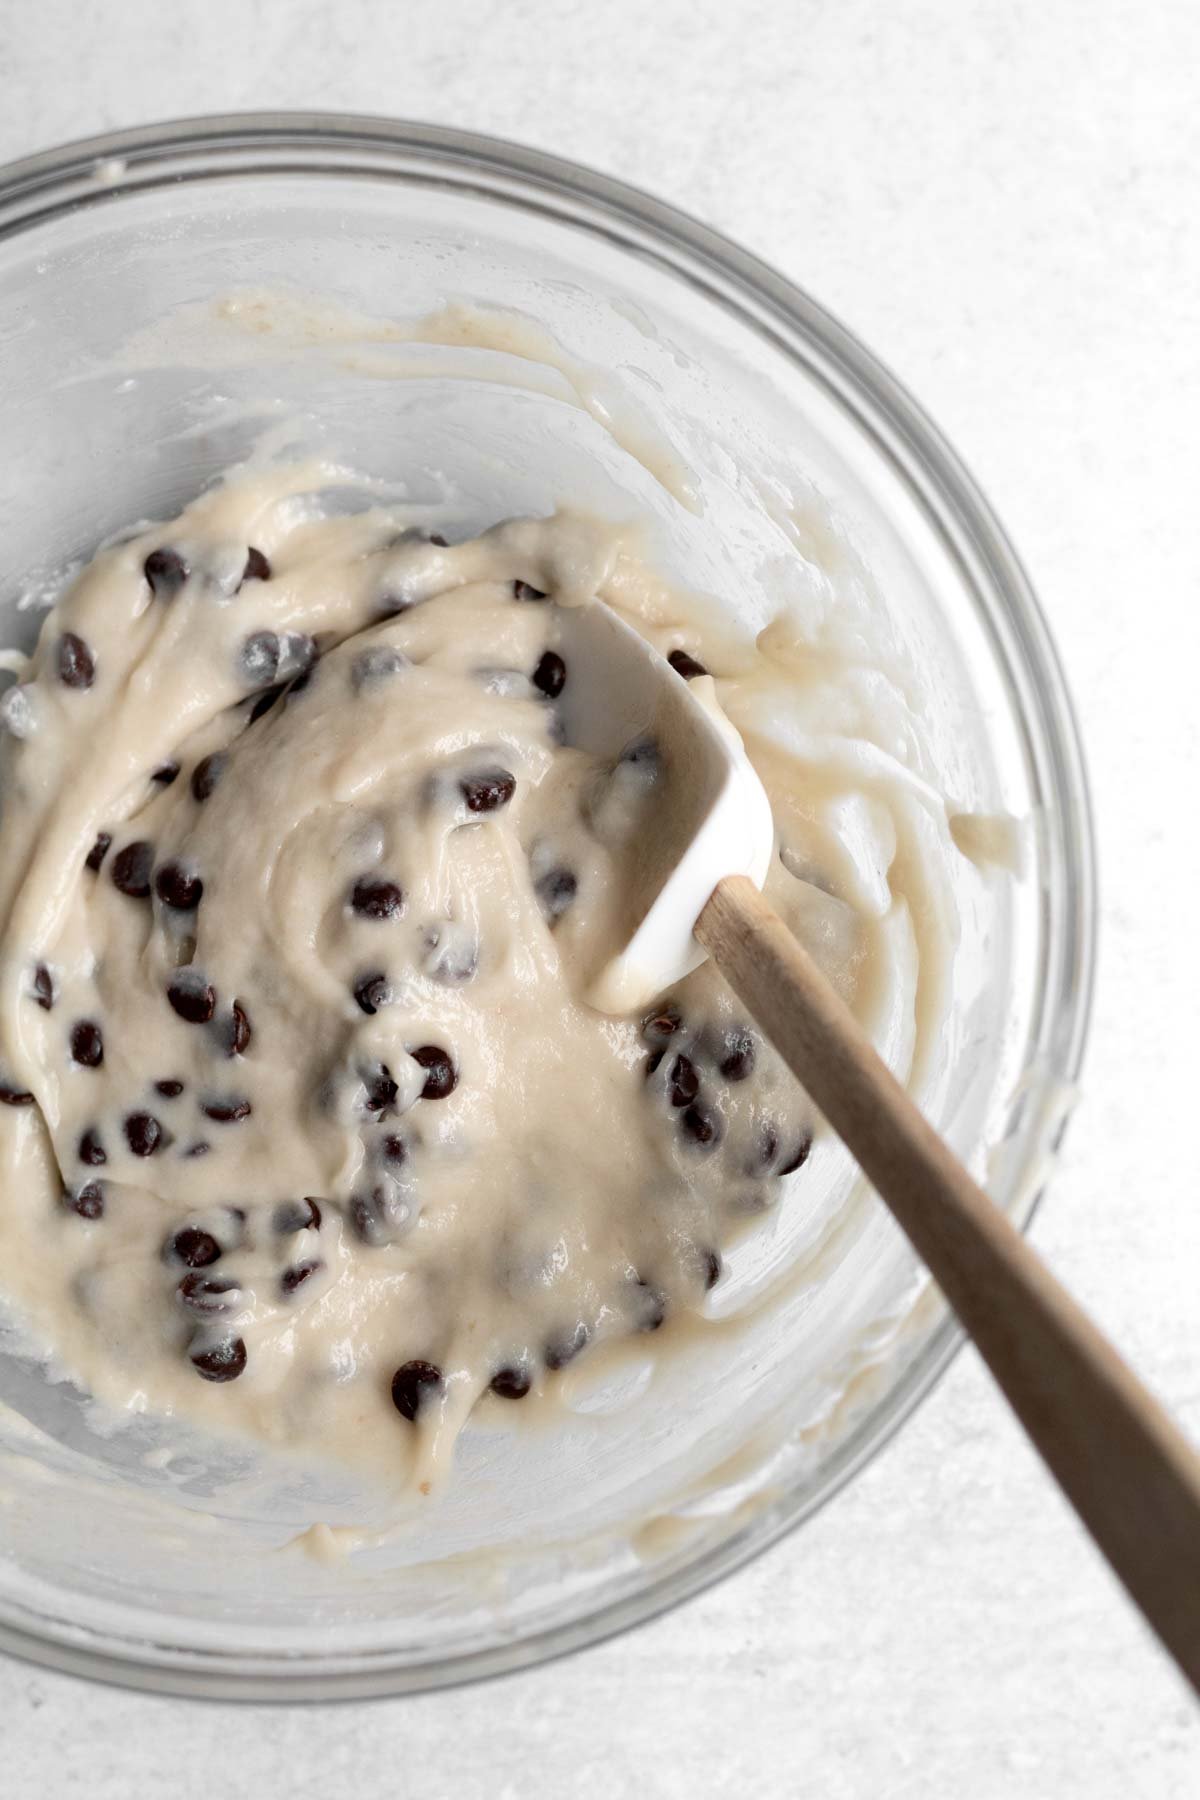 Mixing the chocolate chips throughout with a spatula.